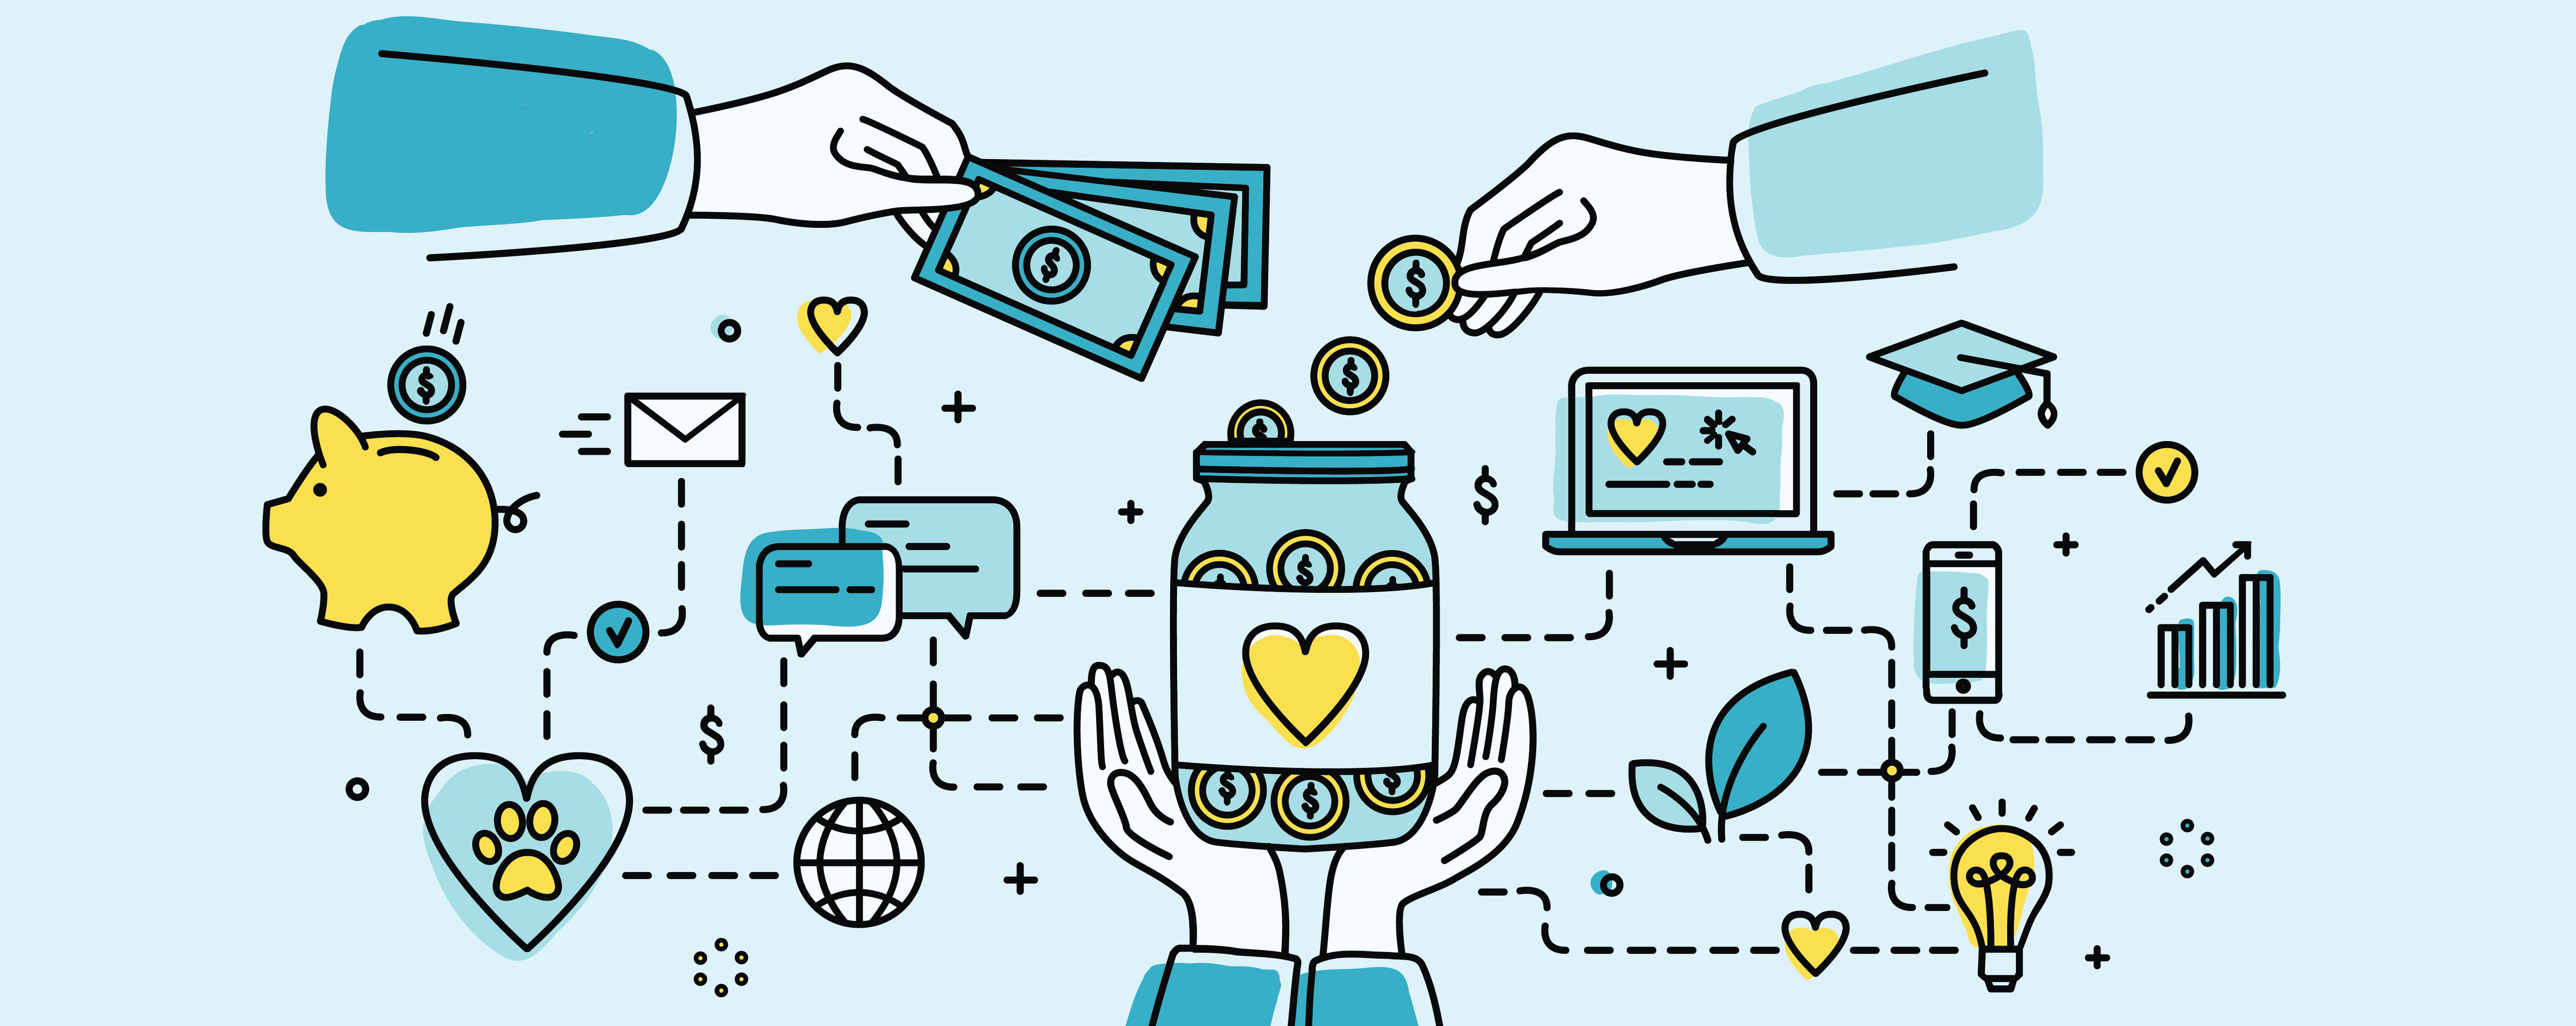 Responsive fundraising visual on donor intent of illustrated money into a jar